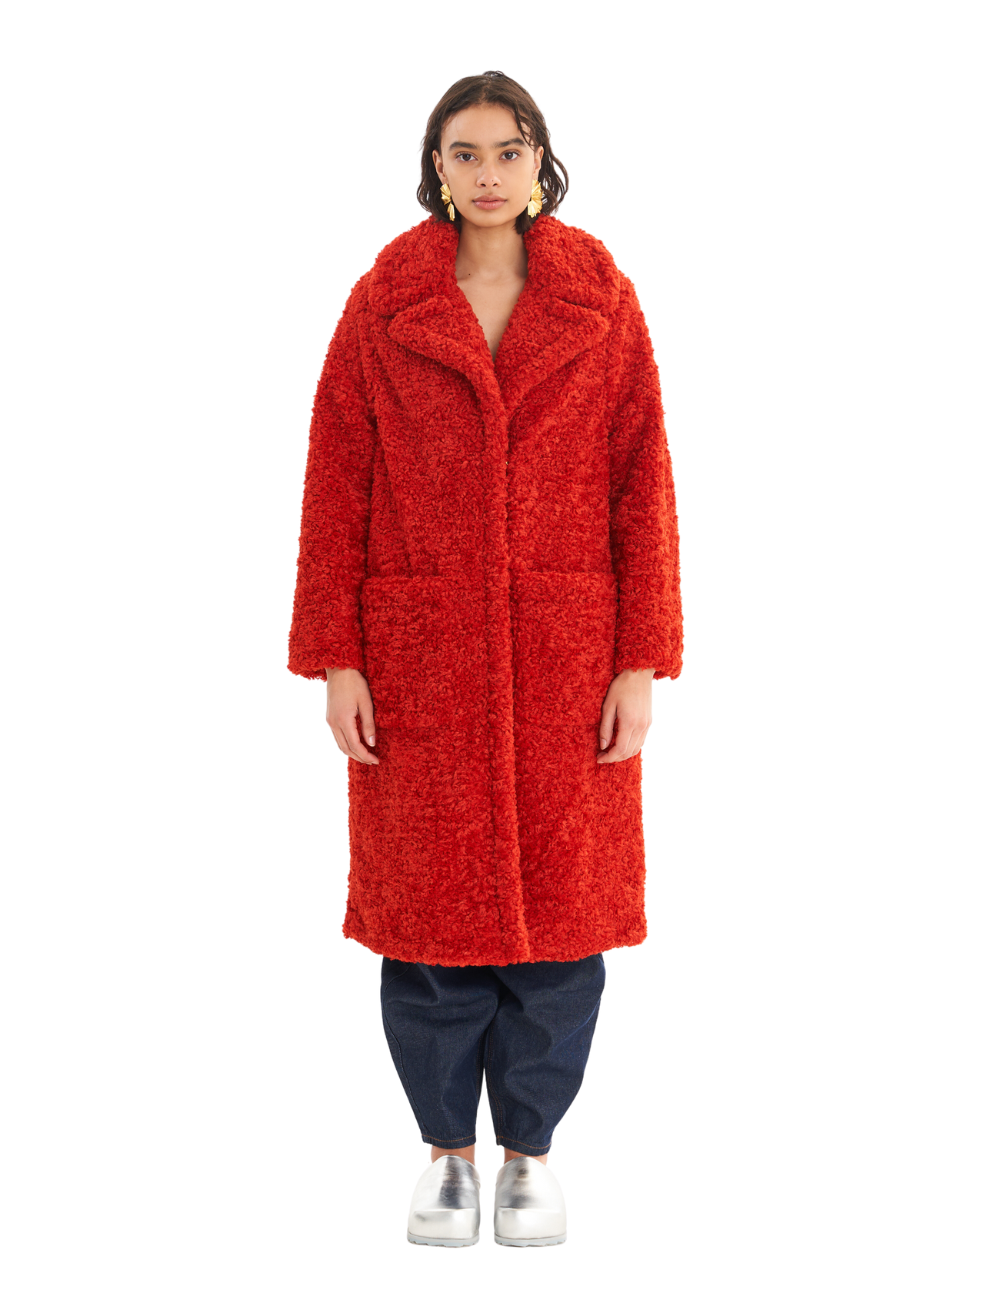 Ruby Red Ethical Outerwear Made in Canada Upcycled Vegan Sherpa Long Teddy Coat